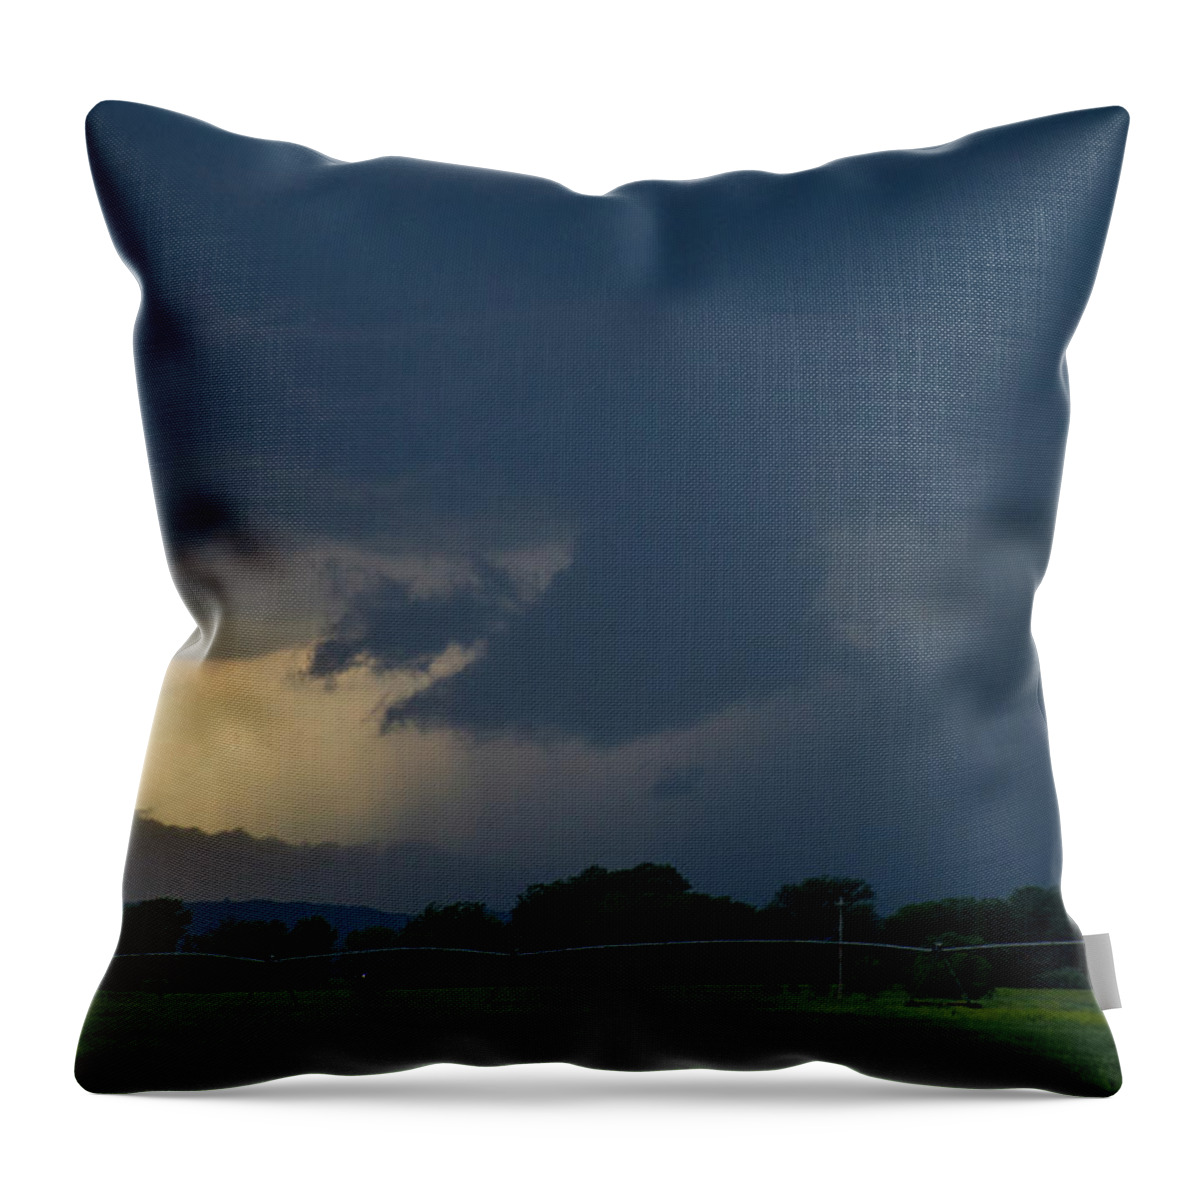 Nebraskasc Throw Pillow featuring the photograph Storm Chasing West South Central Nebraska 010 by Dale Kaminski